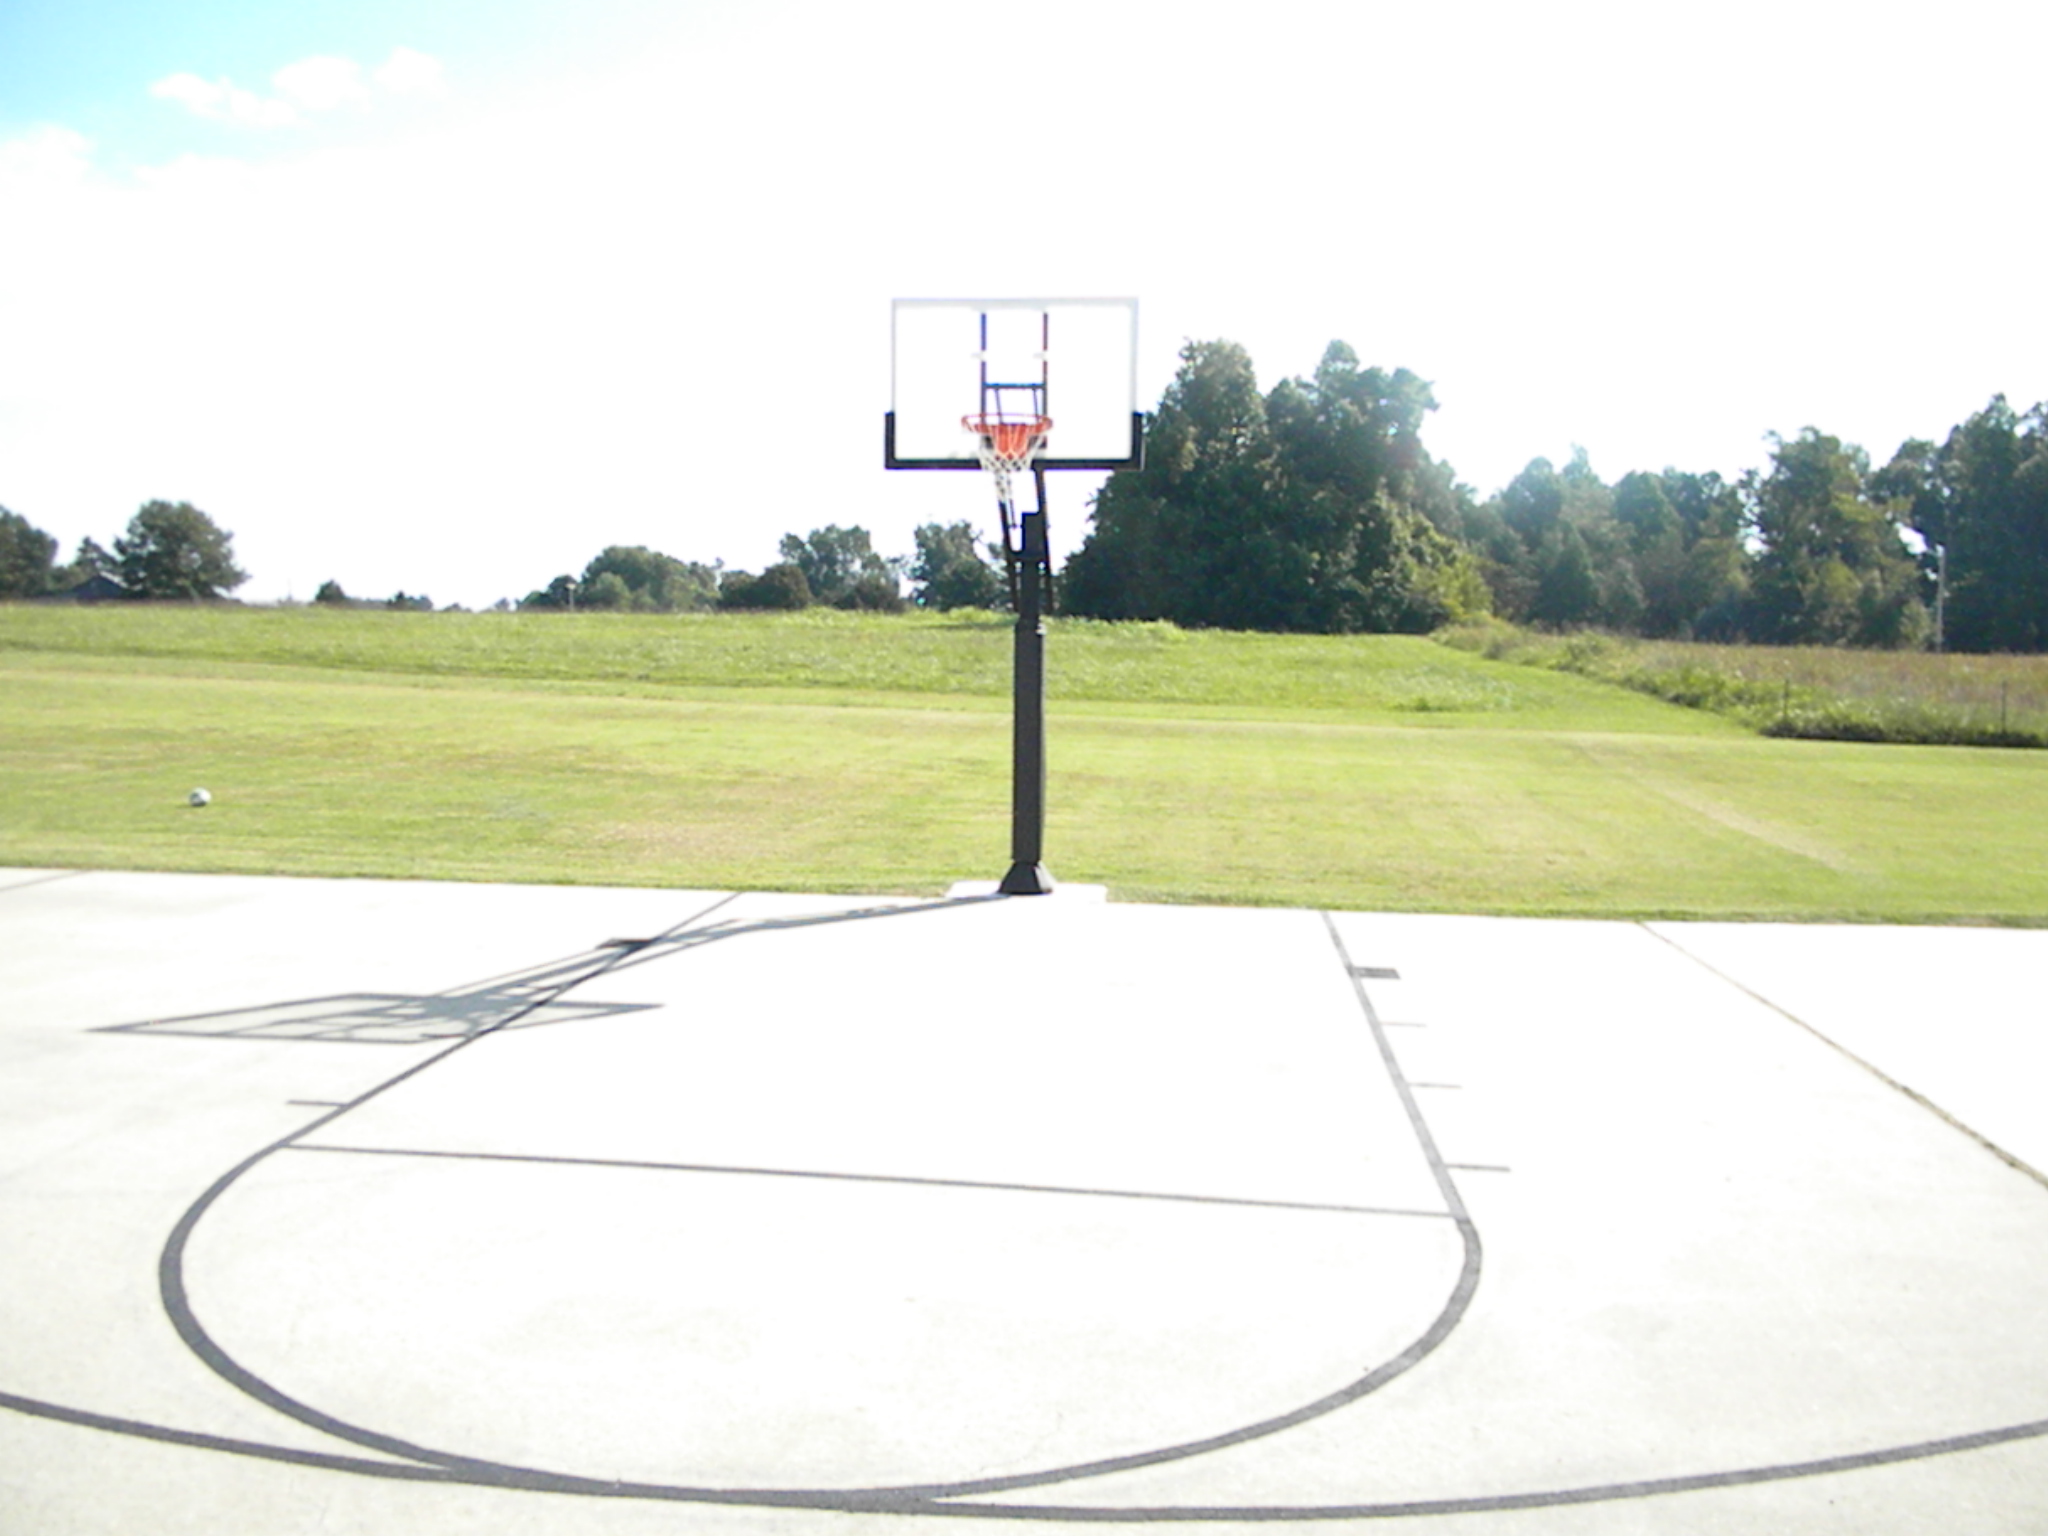 From the top of the key, it's easy to see how this Pro Dunk Silver Basketball adds to the value of this Missouri home. 